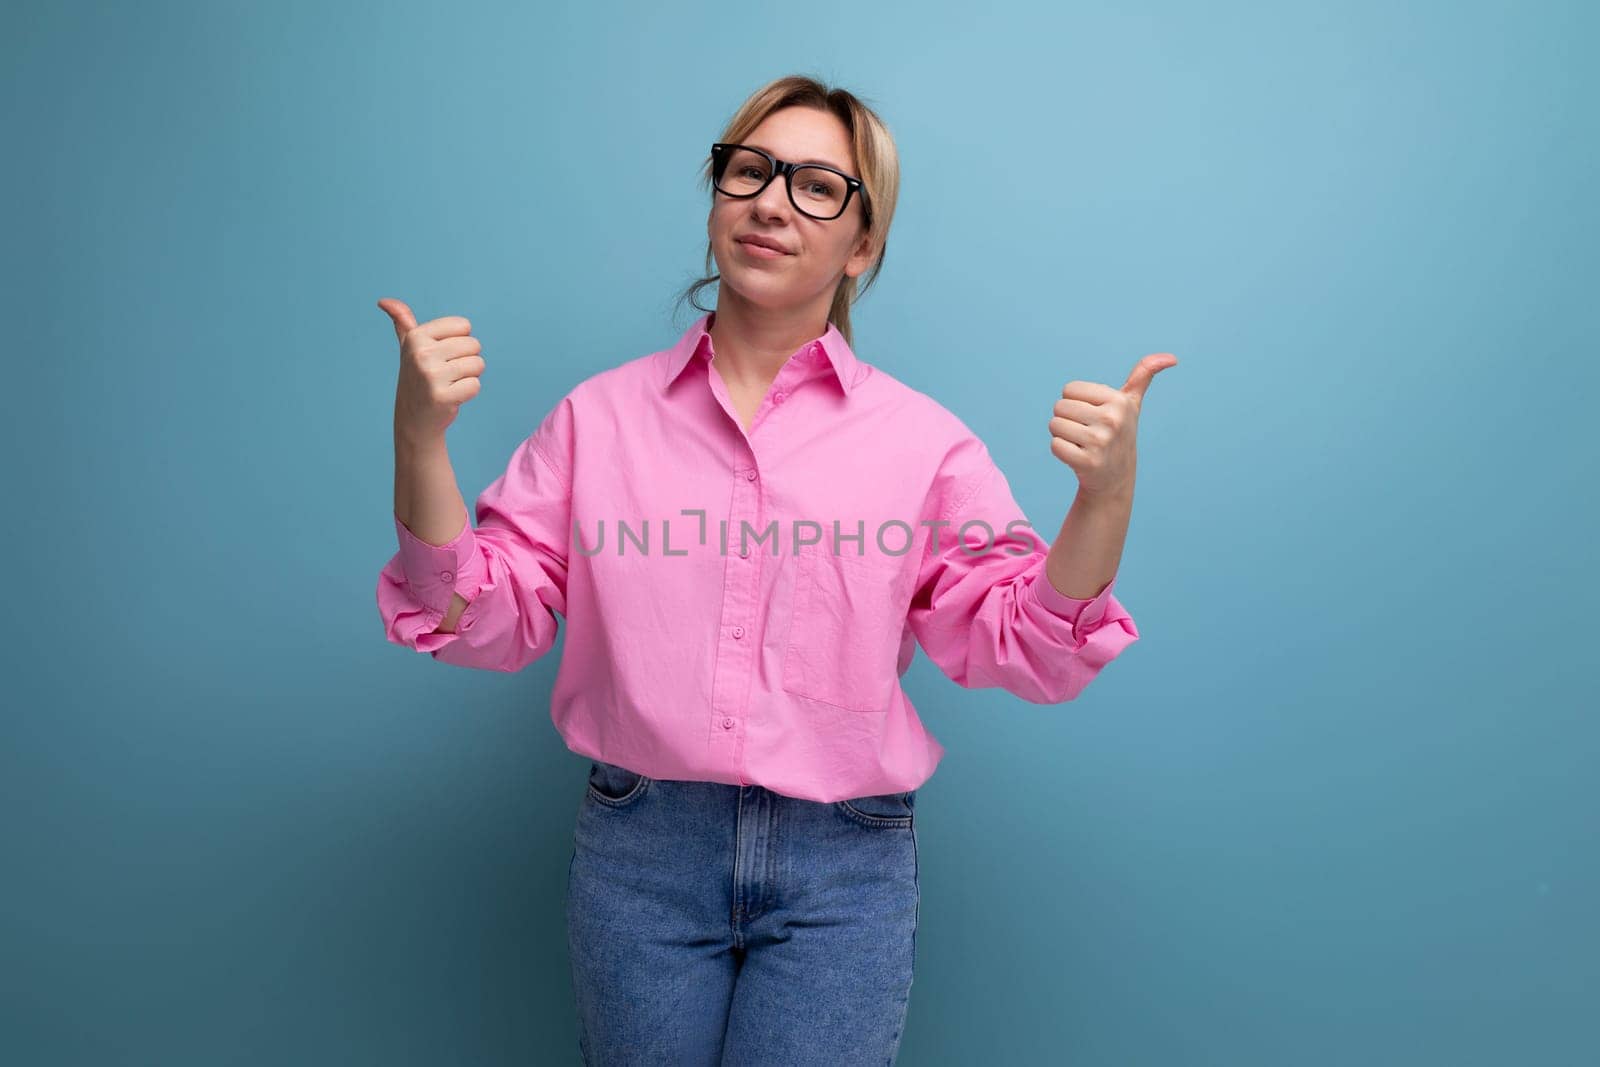 european young blond businesswoman in a pink shirt and jeans is actively gesturing on a studio background with copy space.